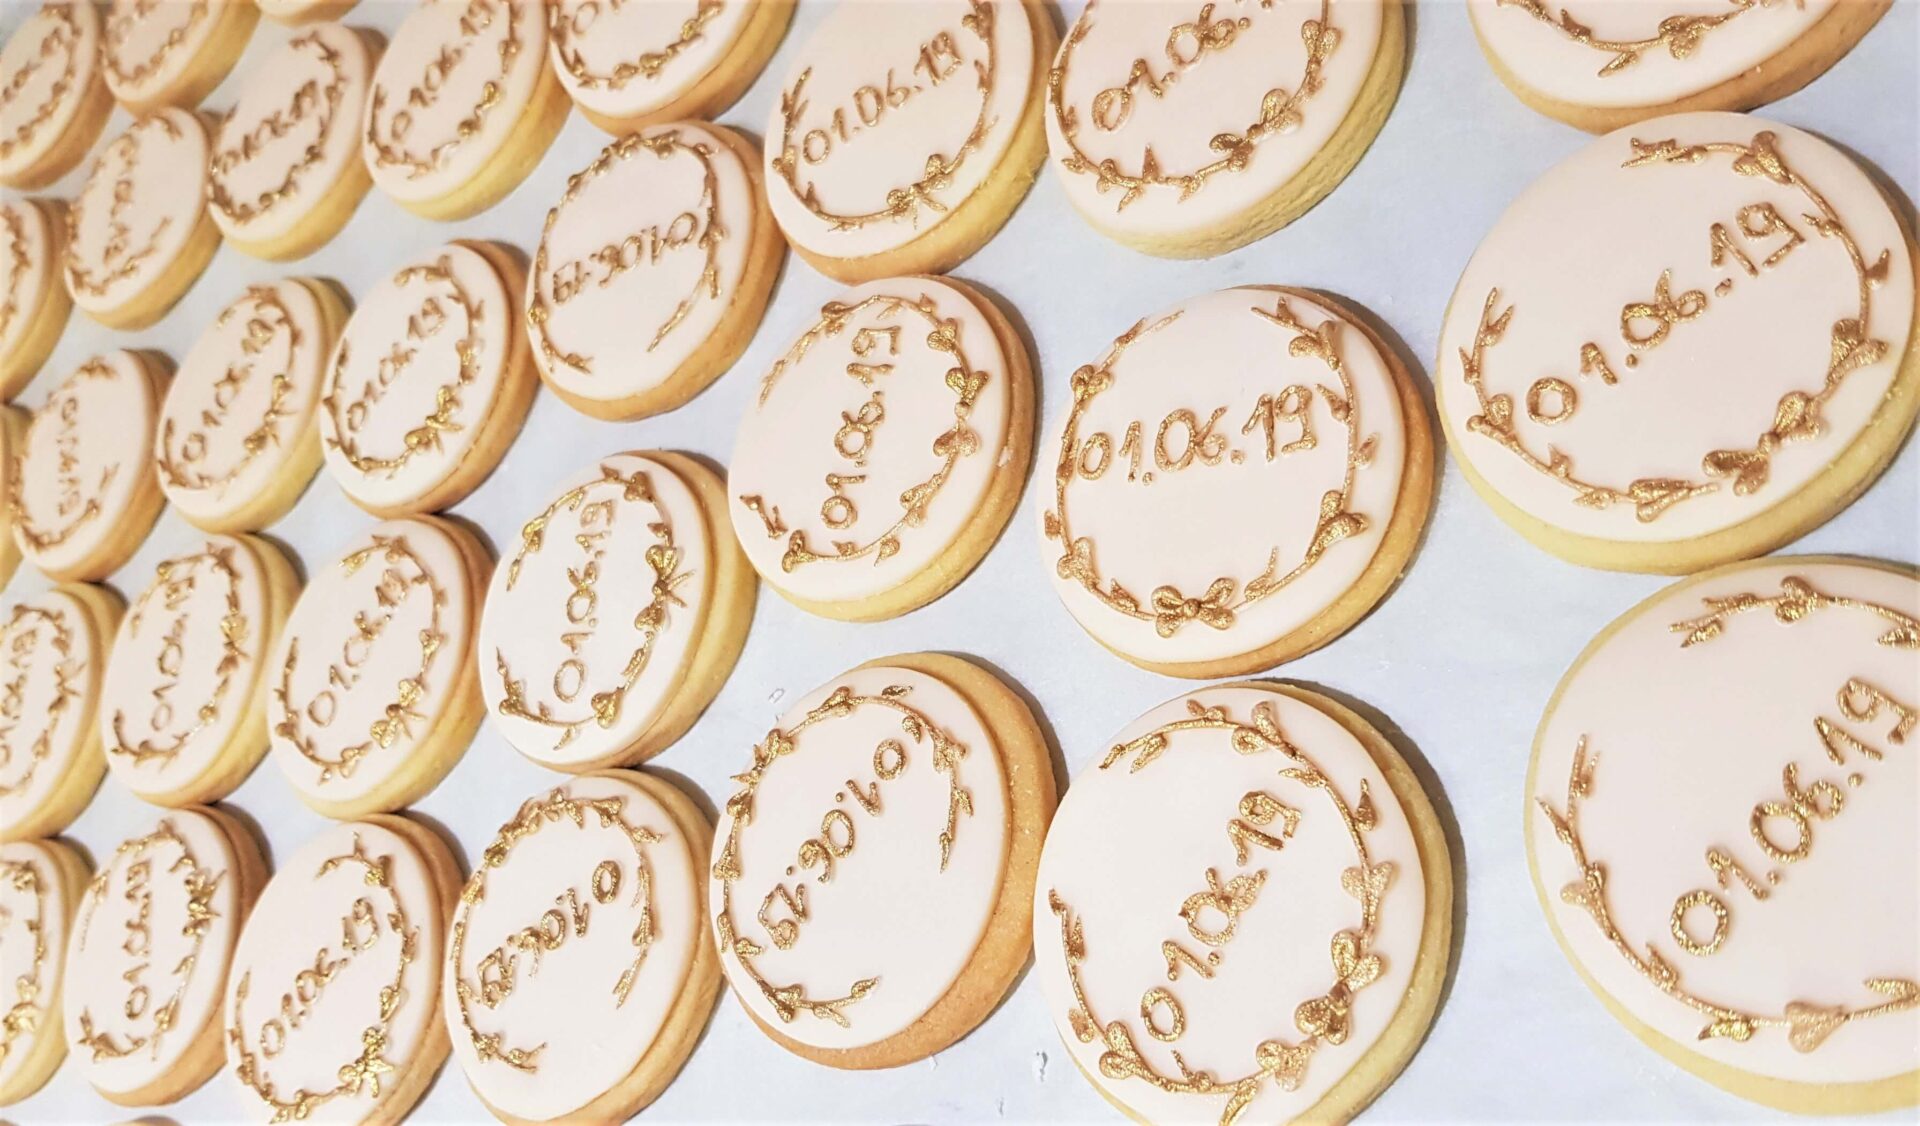 Custom Biscuit Wedding Favours to compliment your wedding cake By Yevnig London